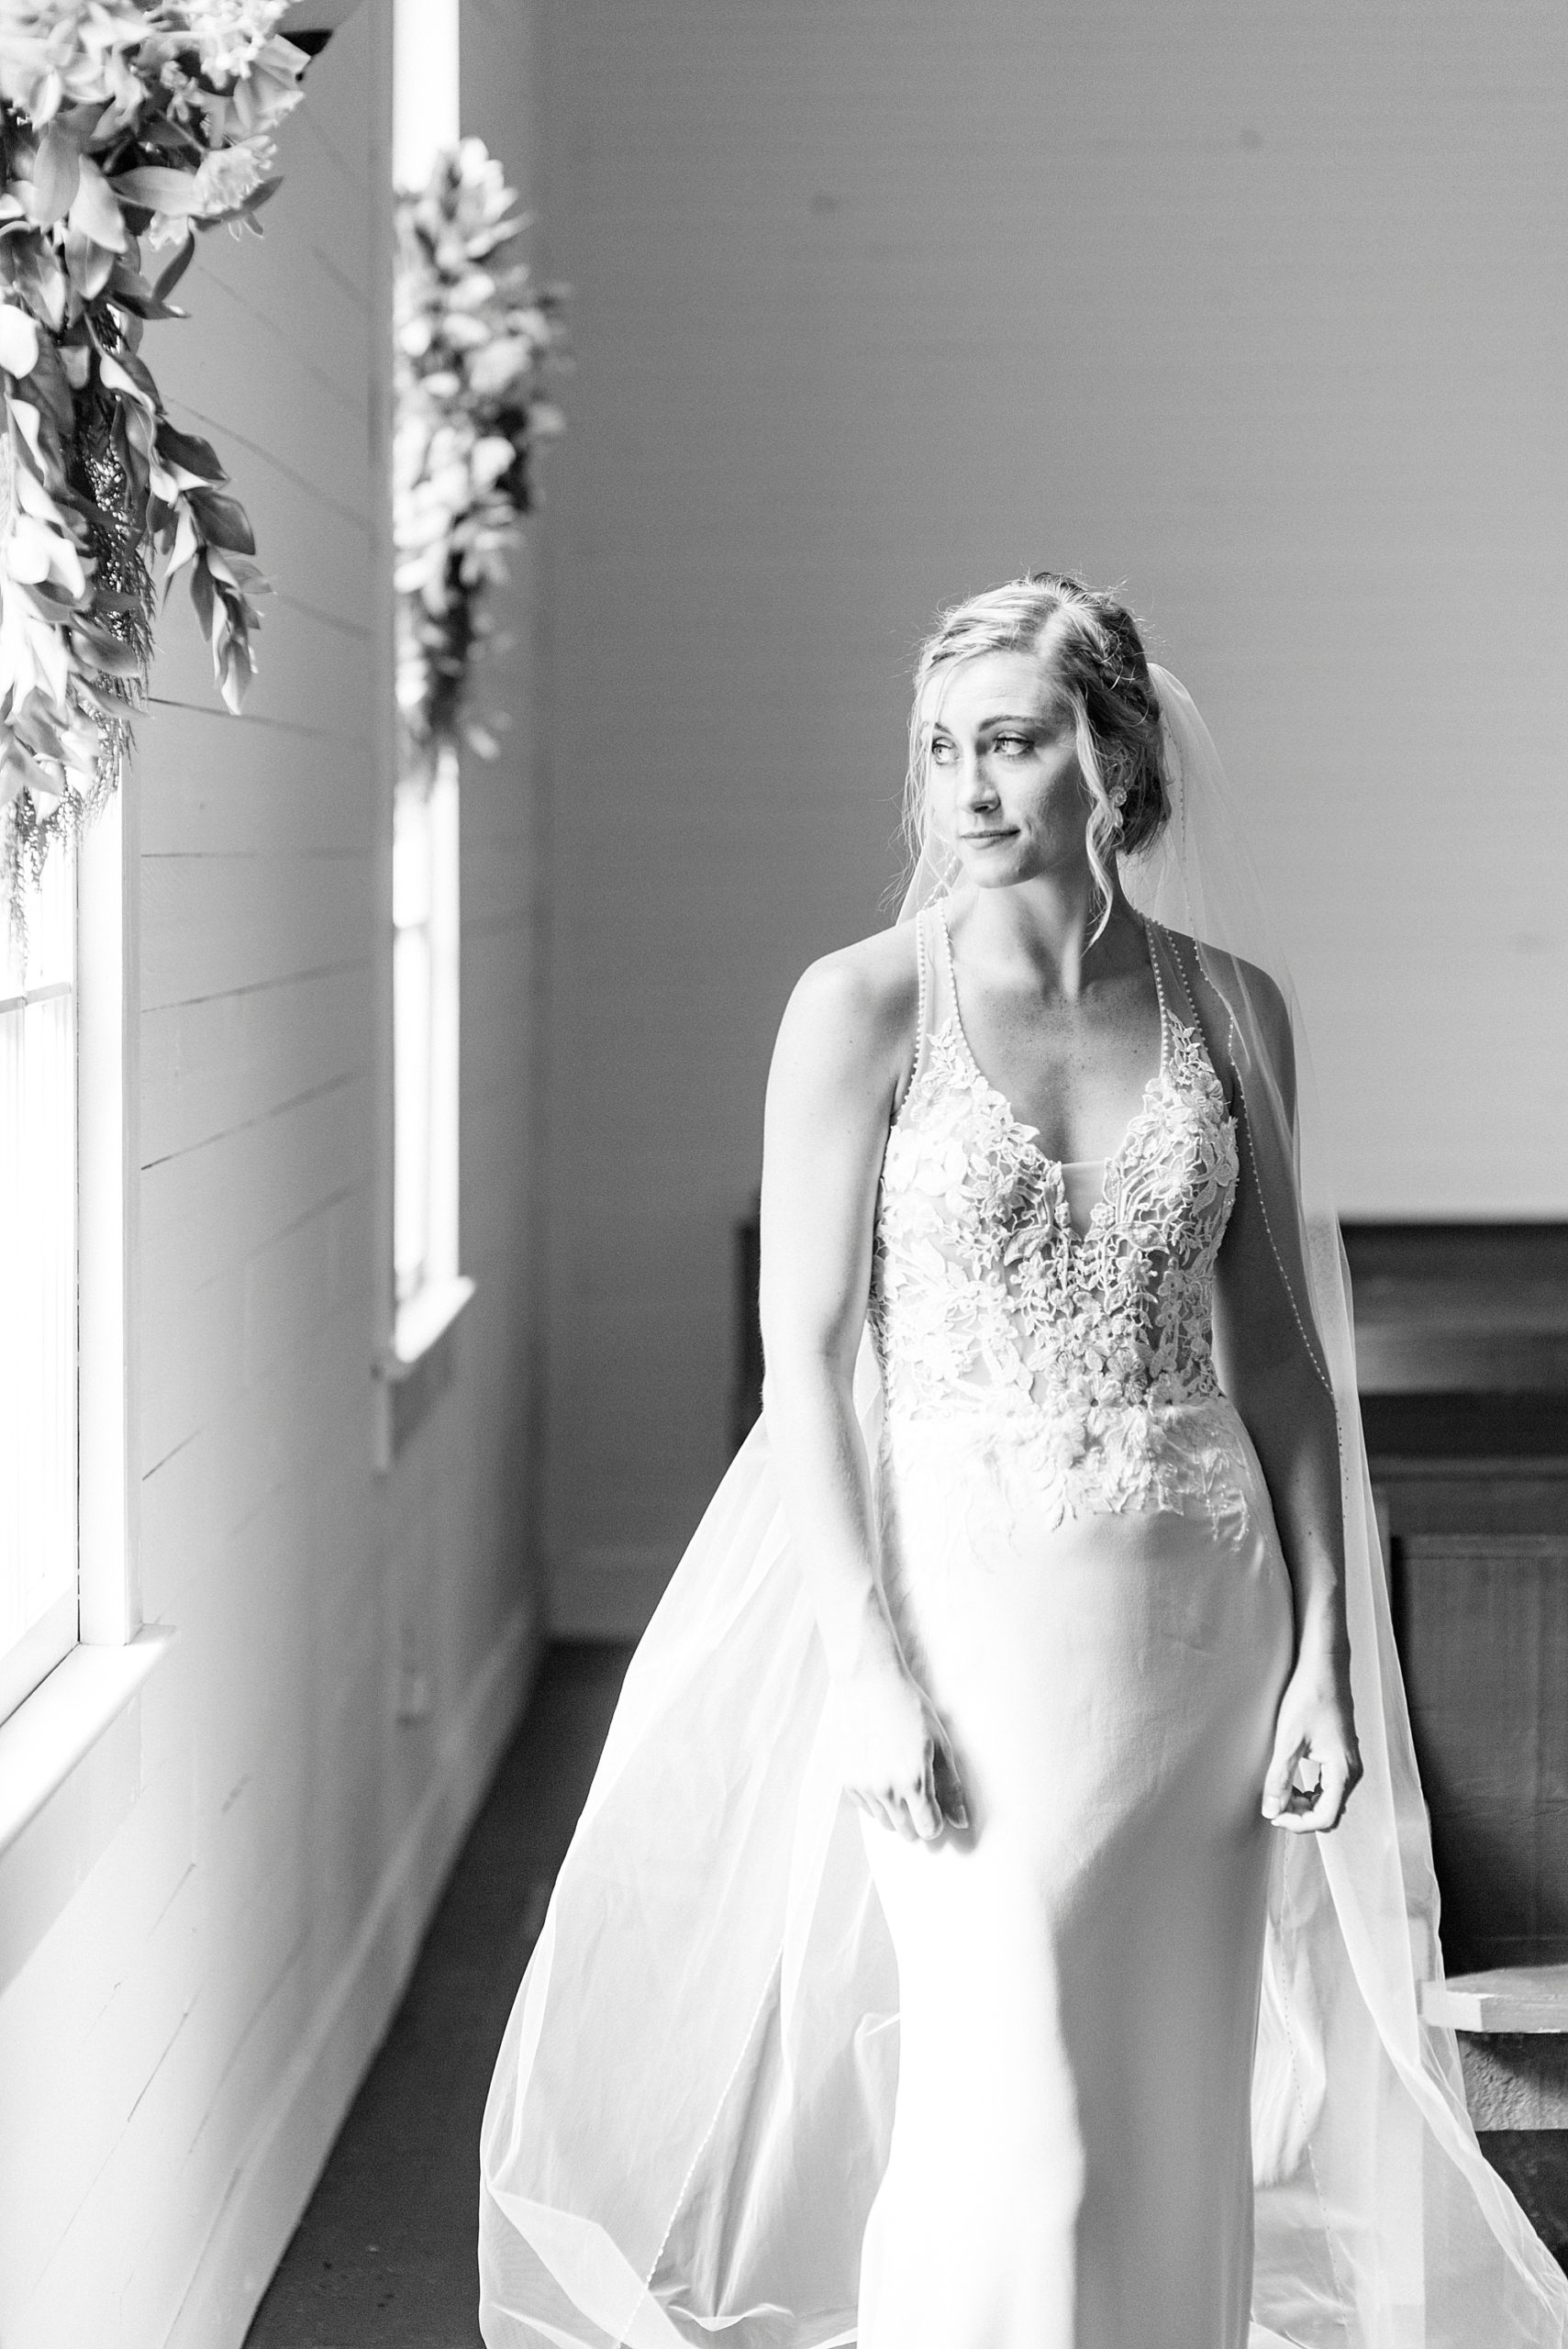 bride looks out window during portraits in church